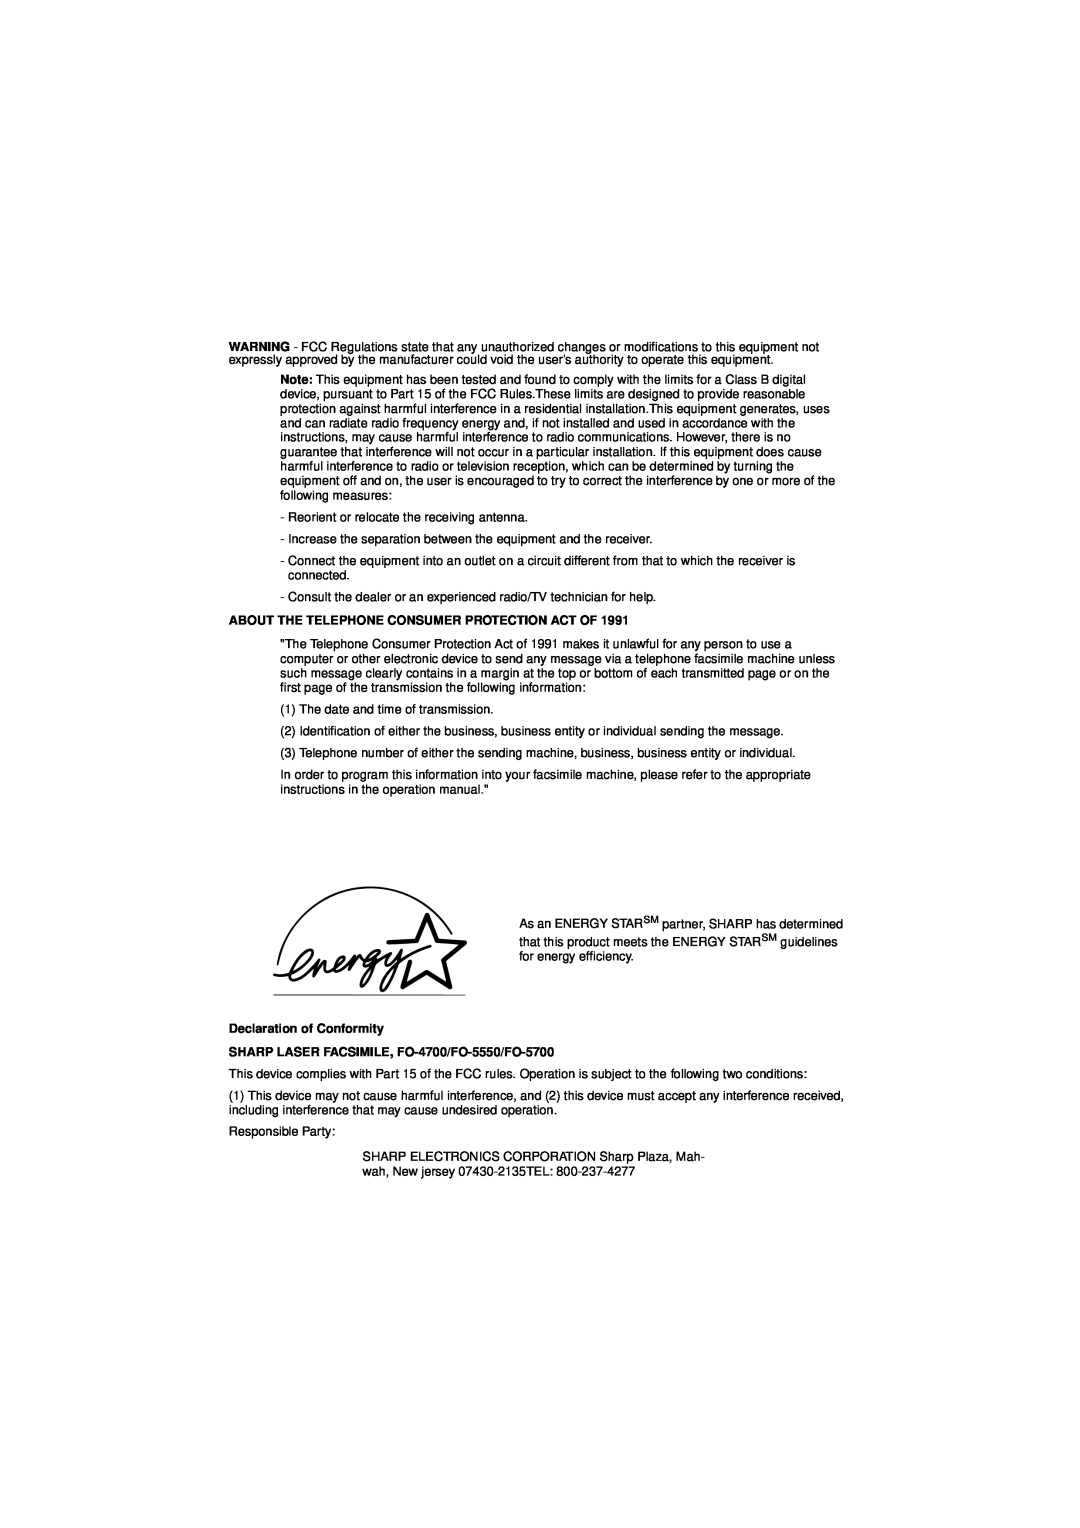 Sharp FO-5550, FO-5700, FO-4700 operation manual About The Telephone Consumer Protection Act Of, Declaration of Conformity 